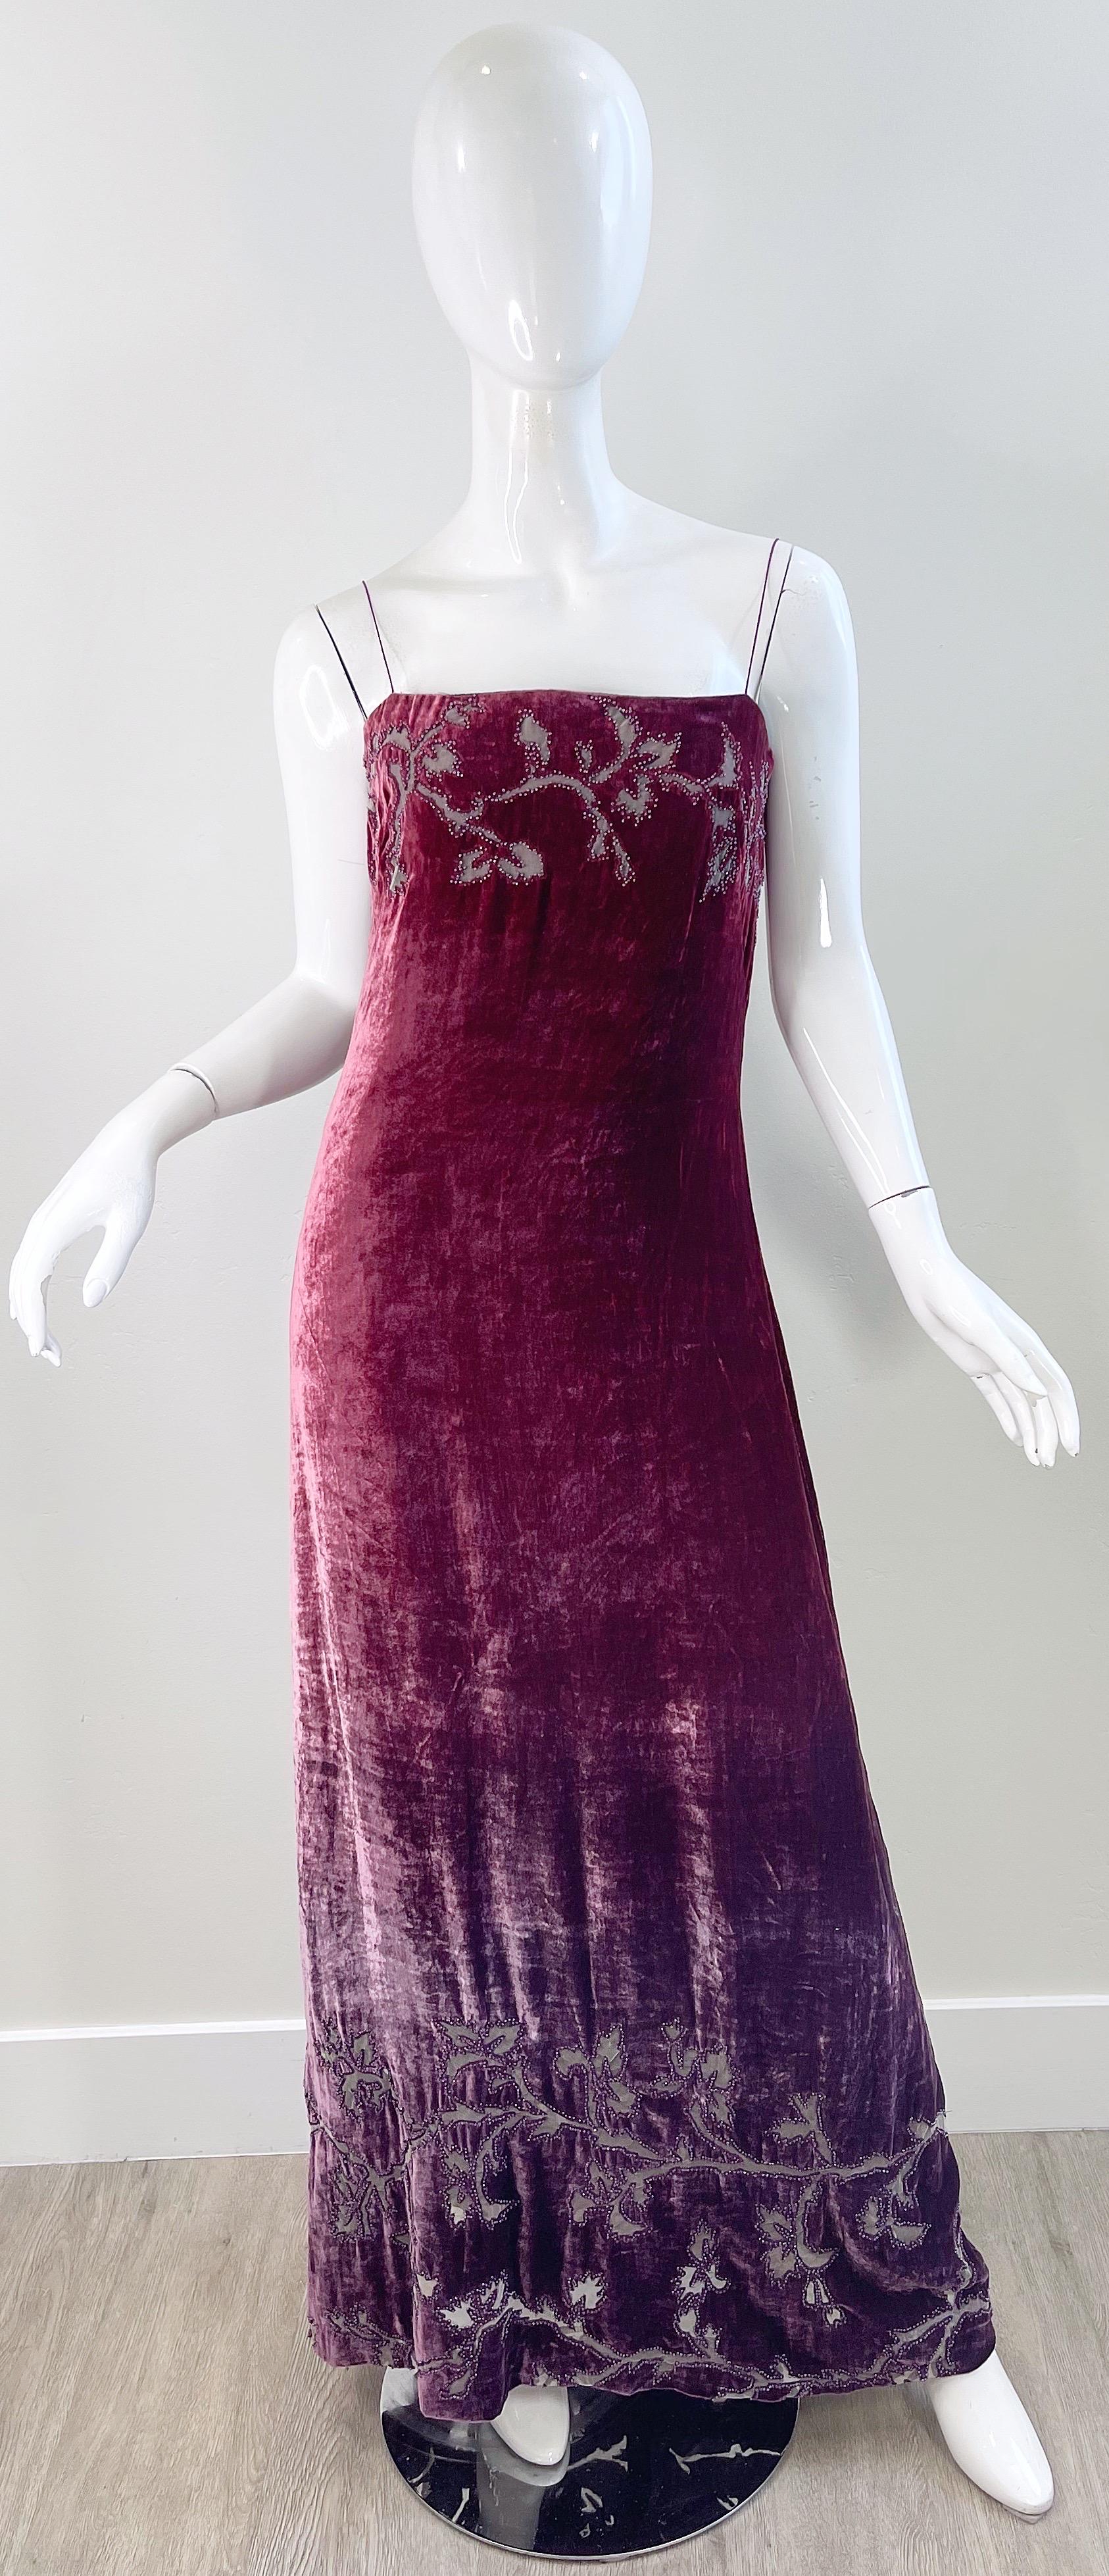 Elegant and regal brand new late 90s (1998) vintage HALSTON by Randolph Duke for Saks 5th Avenue silk burnout velvet devore beaded evening dress ! Couture quality with so much attention to detail. Built in corset on the inside holds everything in